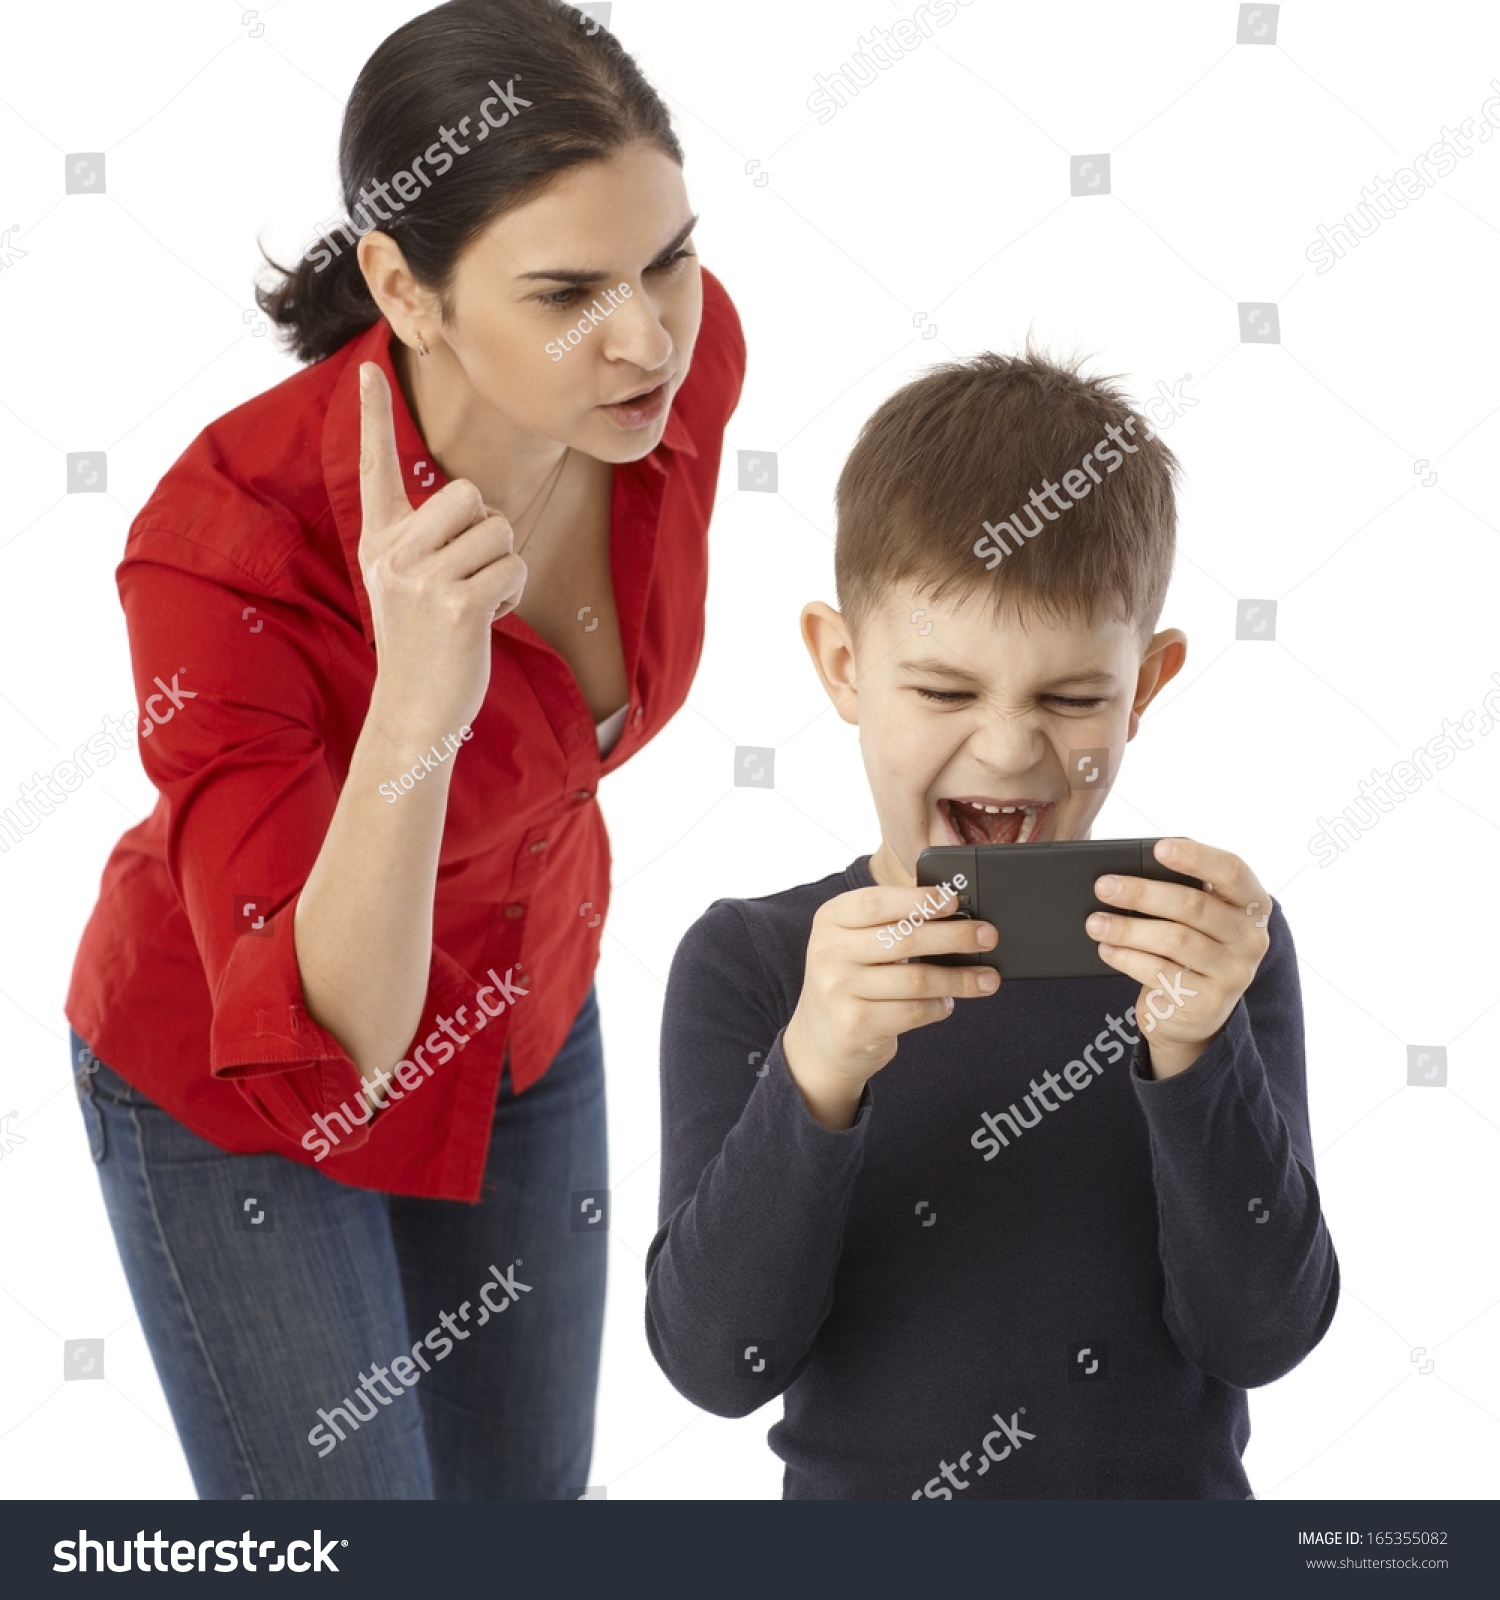 Image result for mother scolding a child for mobile